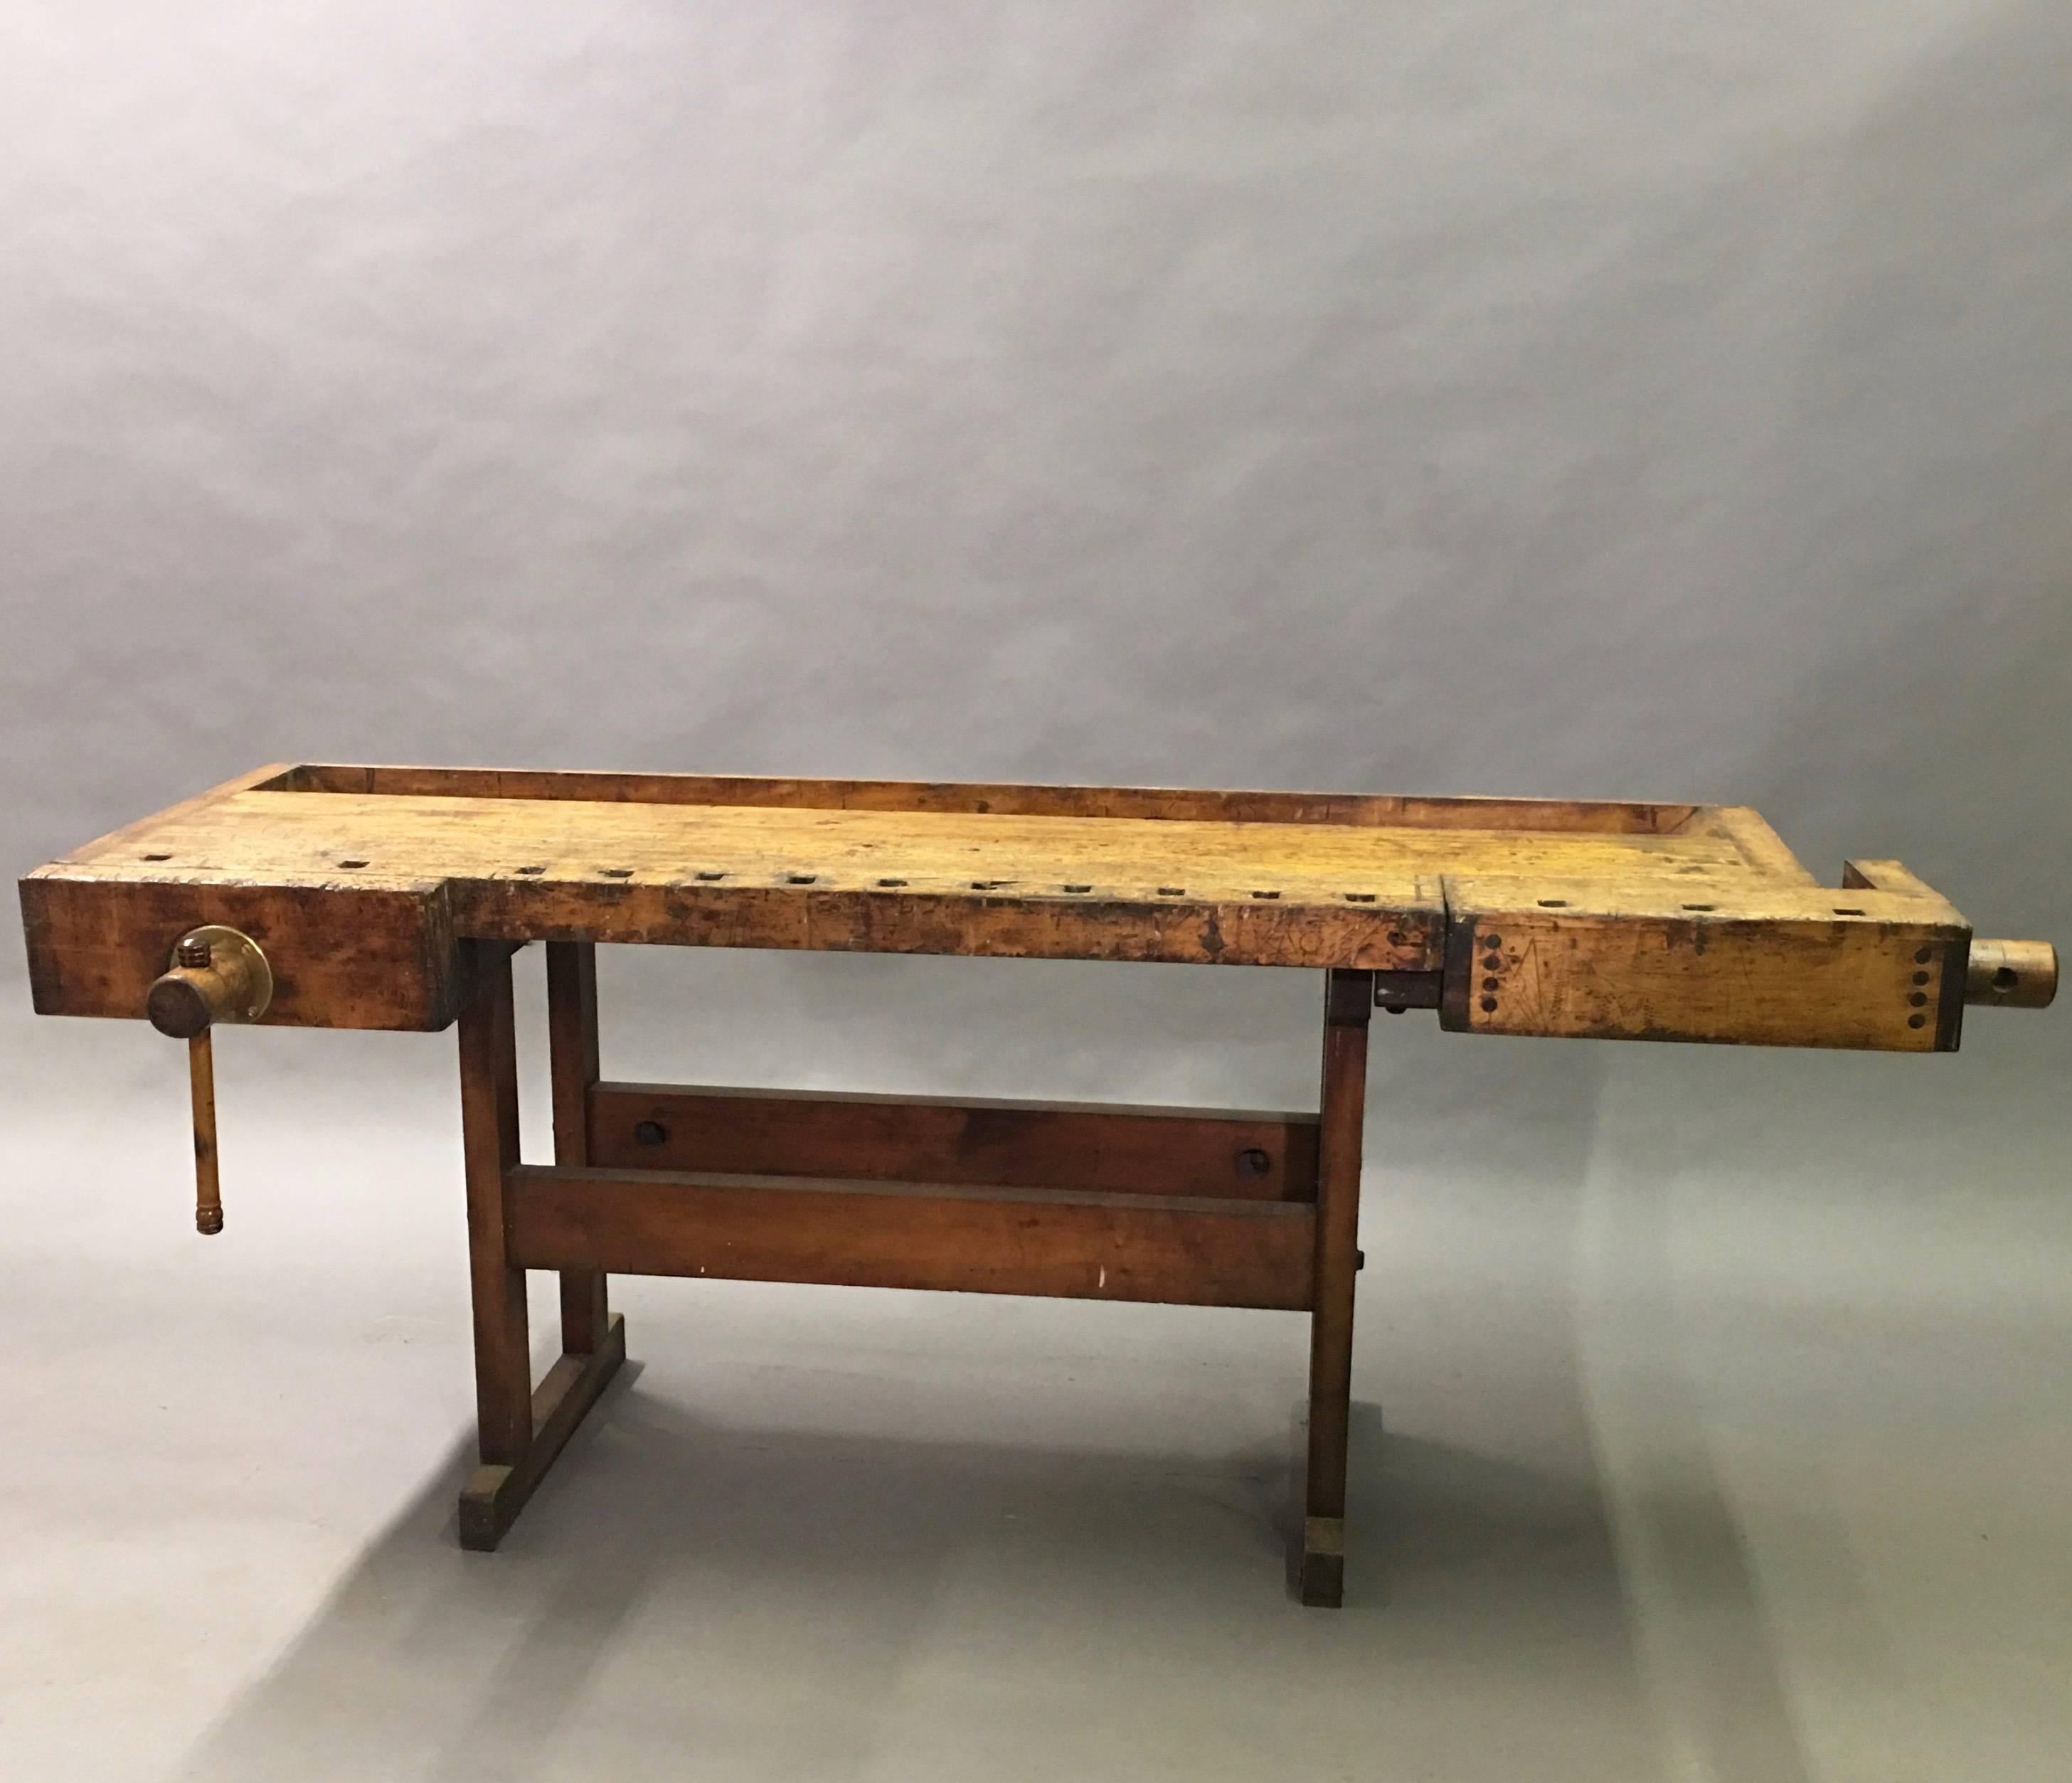 1920s, Industrial, maple work bench or carpenter's table with vise attributed to Hammacher Schlemmer features it's wonderful original work worn patina.